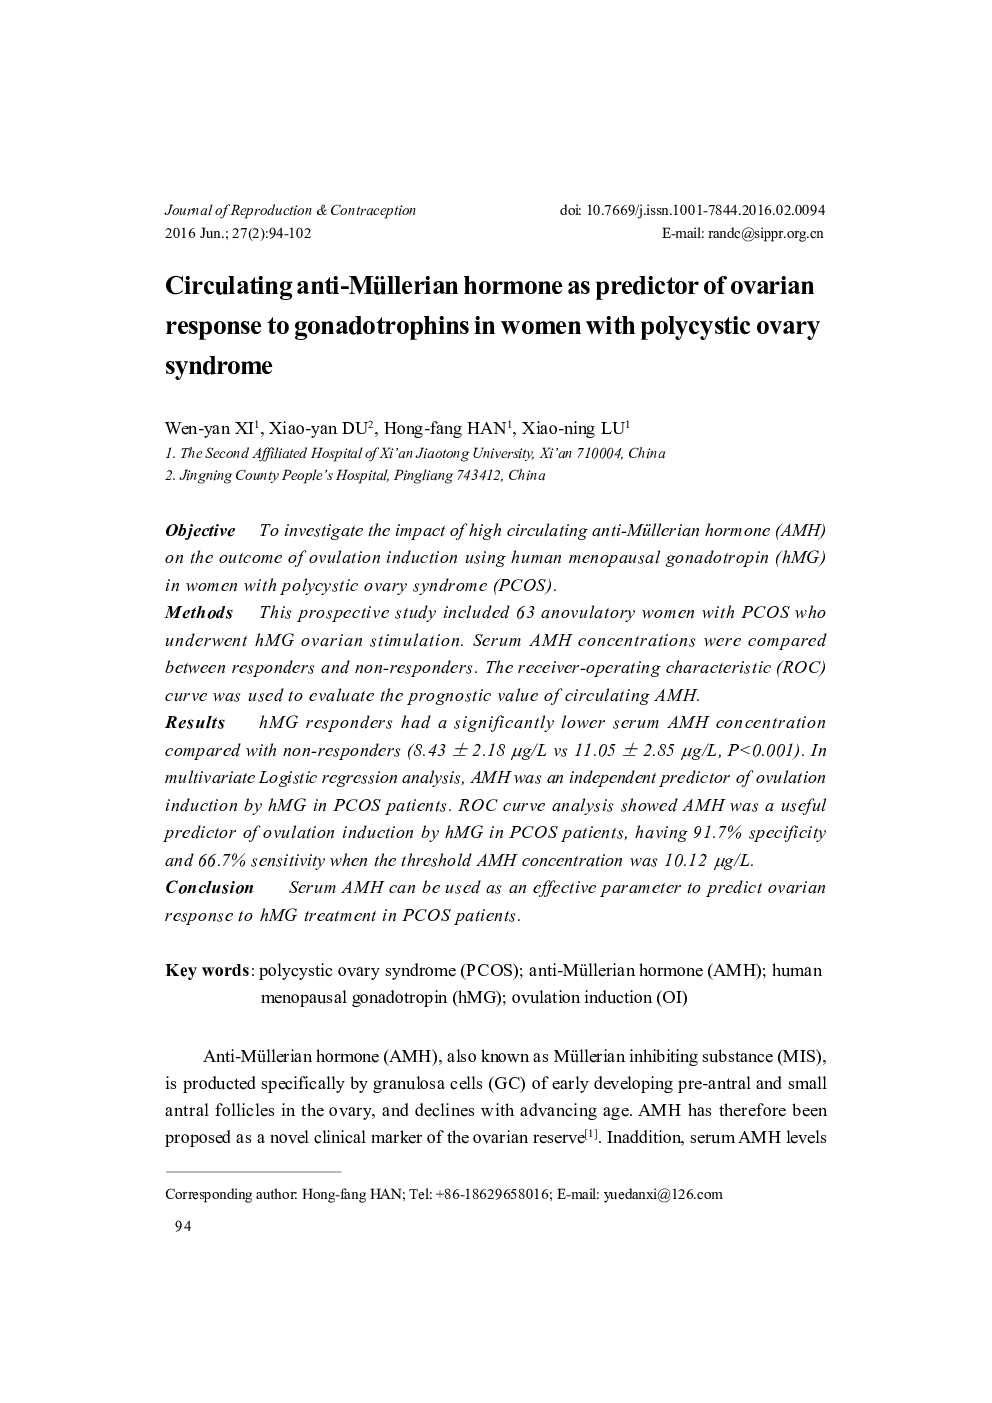 Circulating anti-Müllerian hormone as predictor of ovarian response to gonadotrophins in women with polycystic ovary syndrome